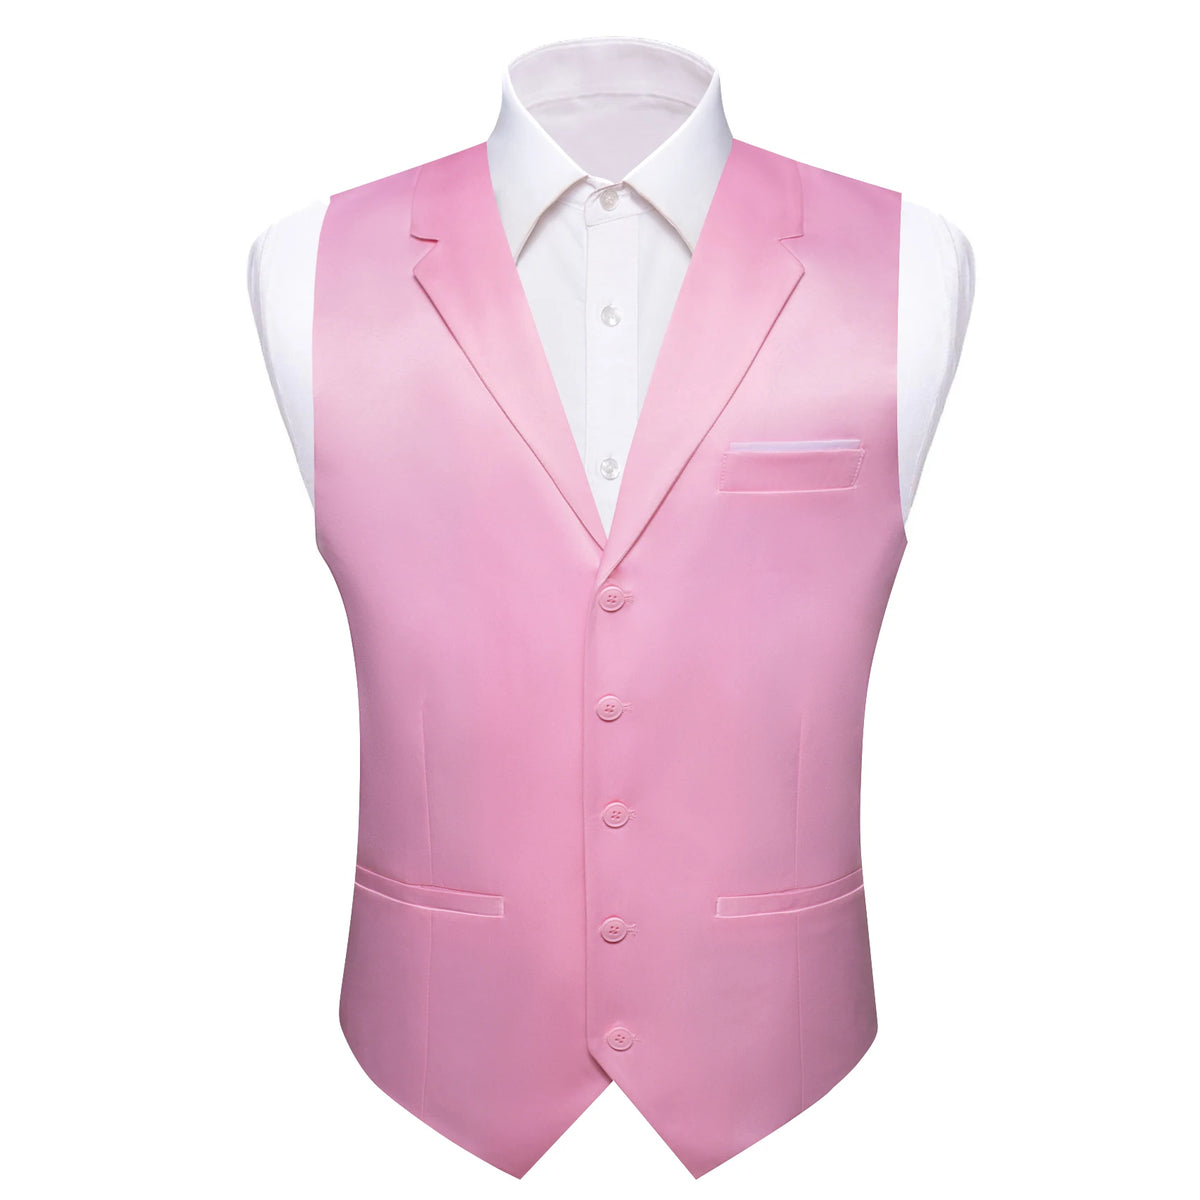 a pink vest and white shirt on a mannequin